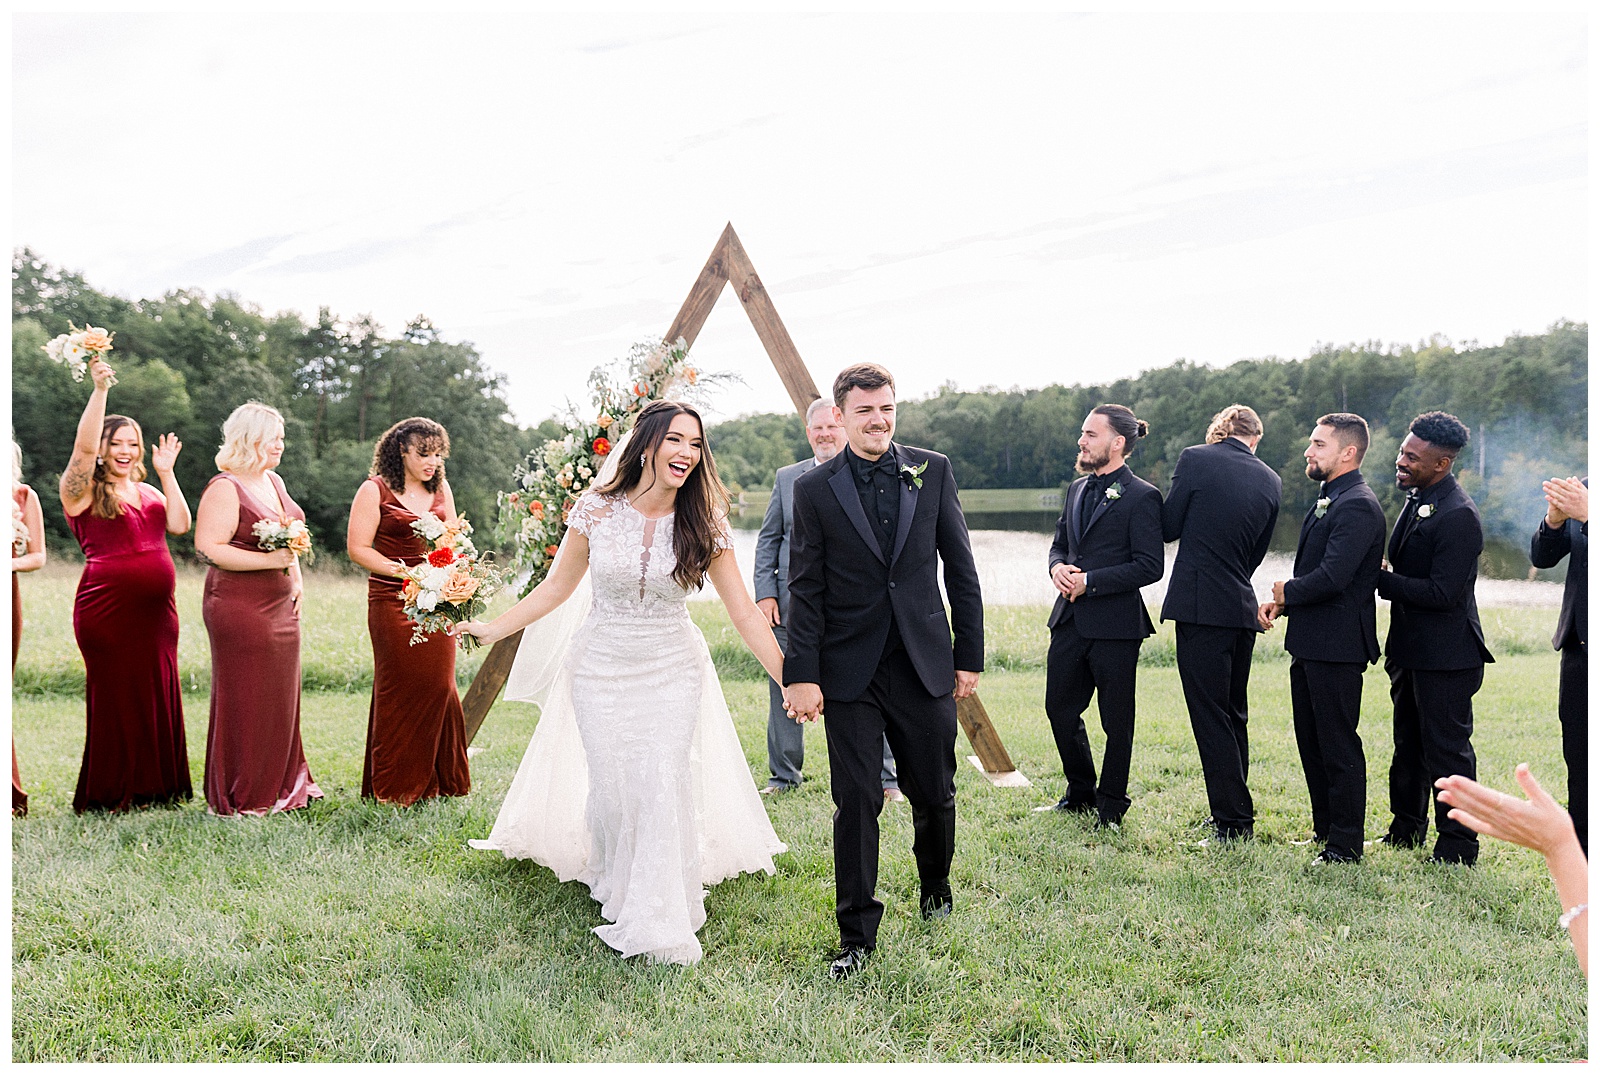 Rust and Terracotta wedding colors Waters Edge Mount Ida Farm Wedding by Michael and Jasmine Photography